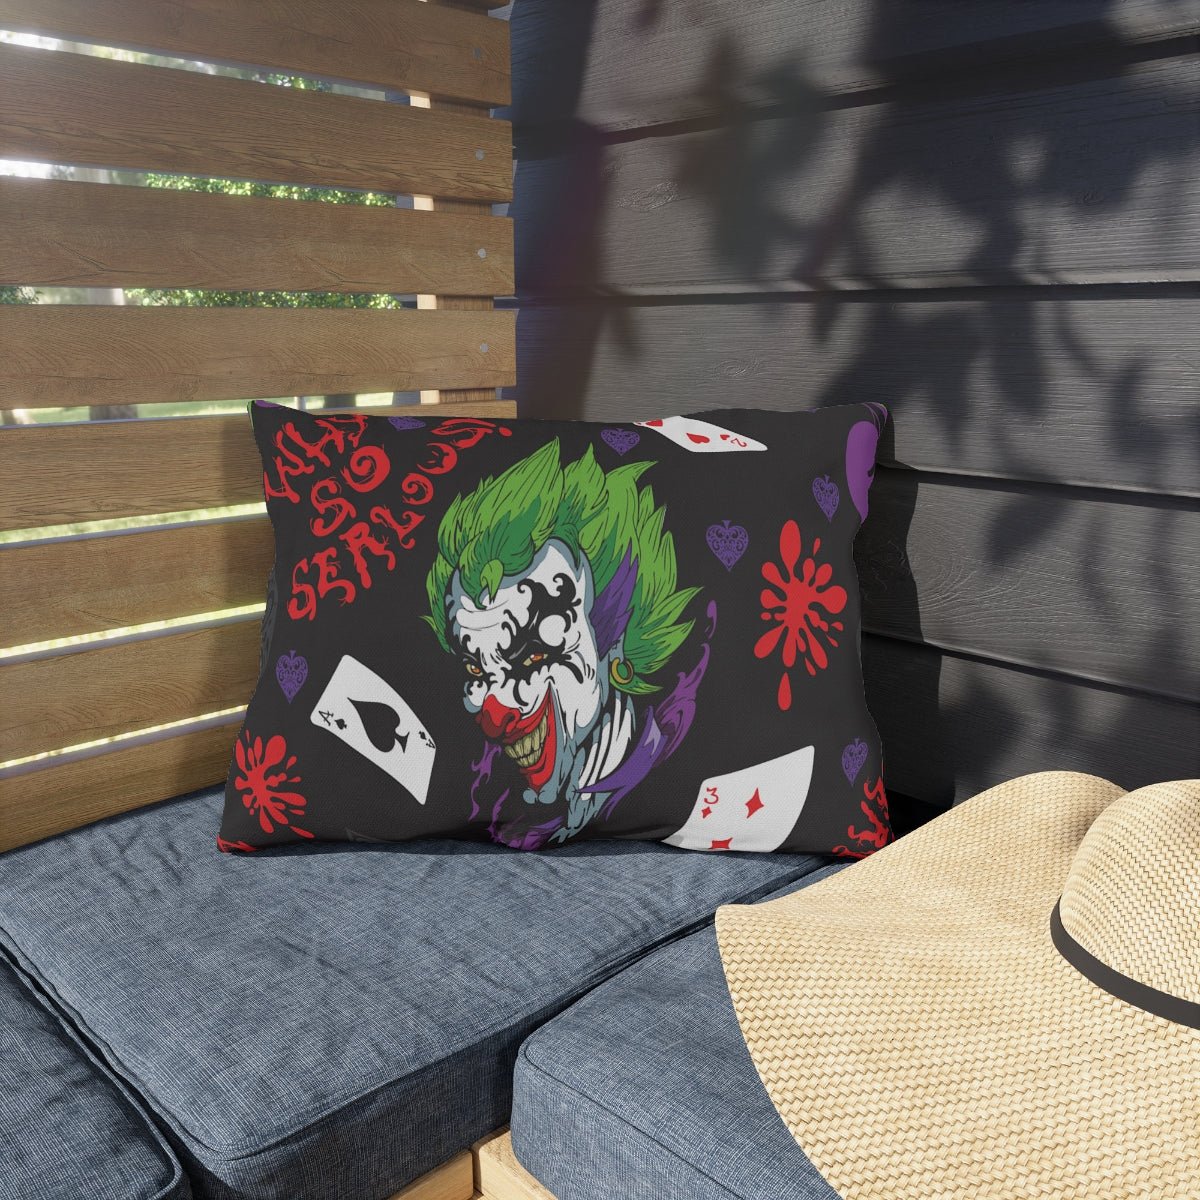 Joker and Poker Cards Outdoor Pillow - Puffin Lime